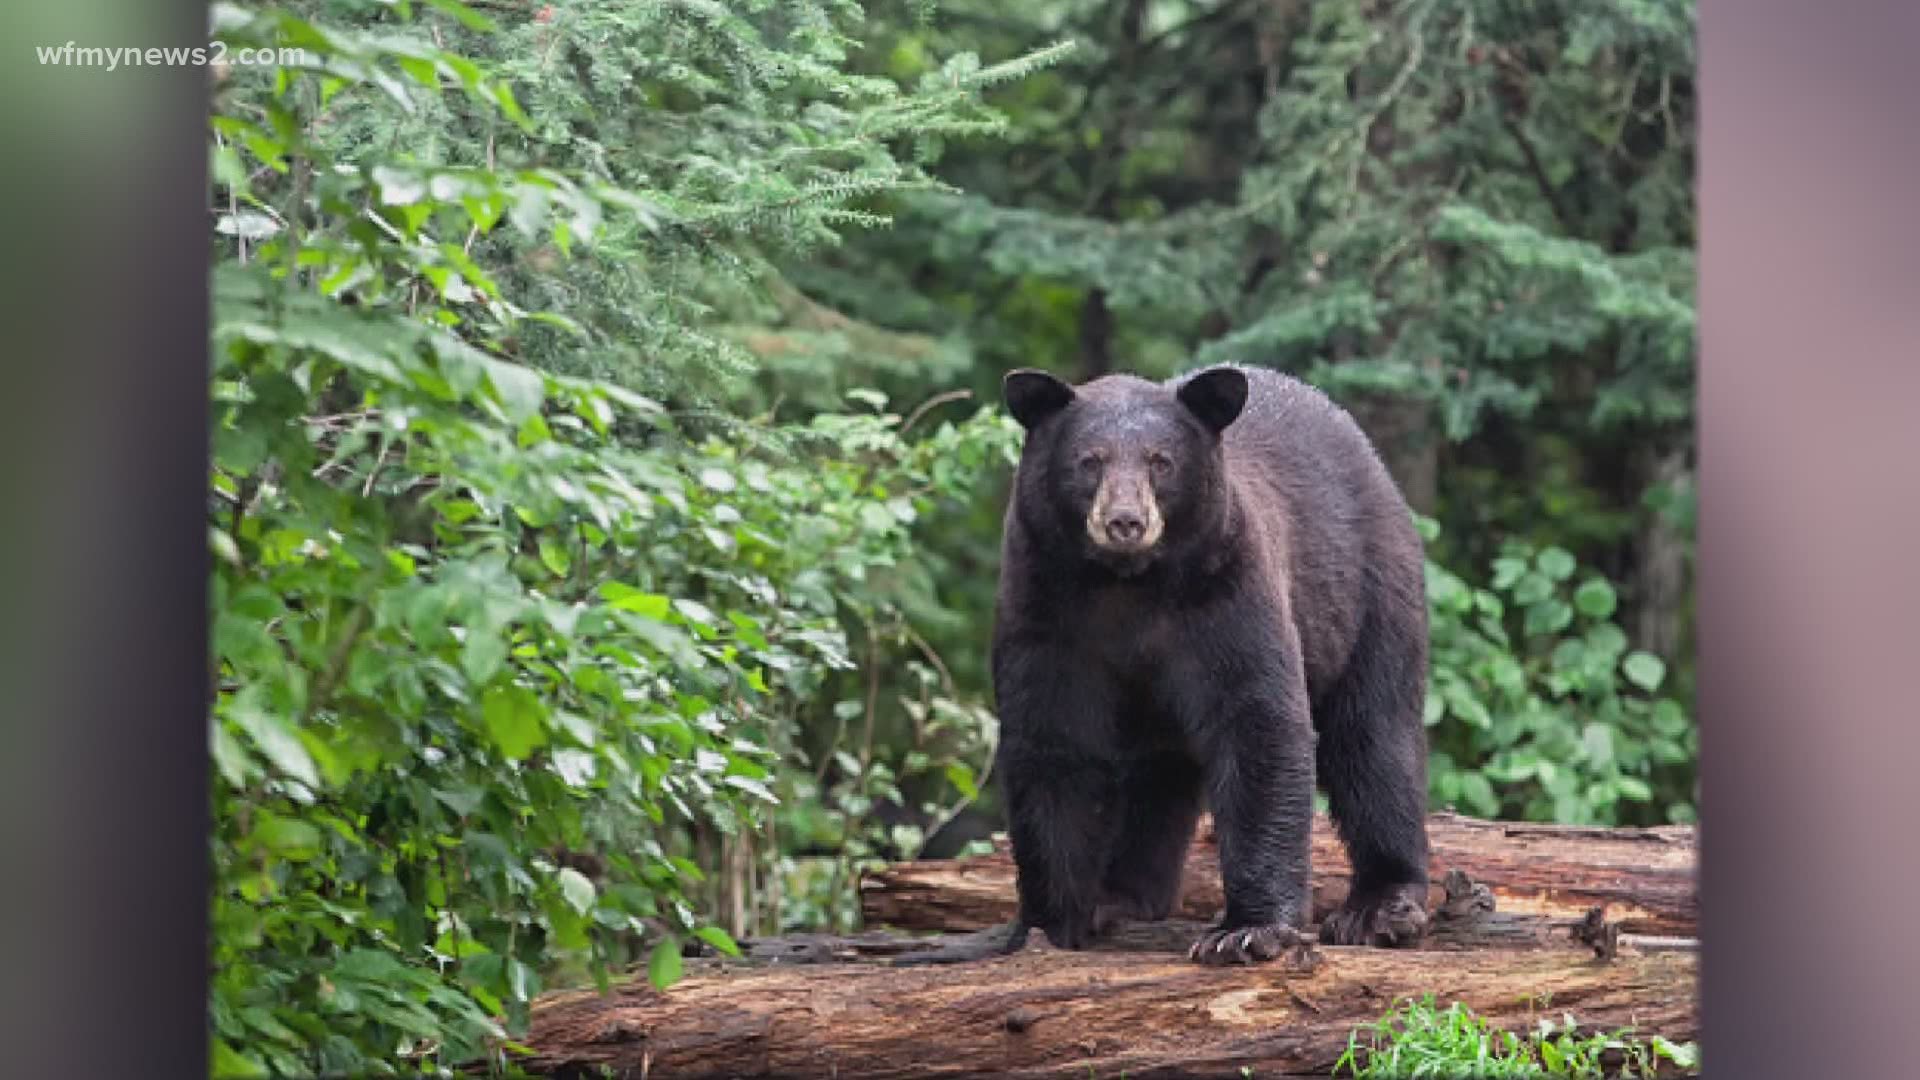 The U.S. National Forest Service is warning hikers about bears taking food and backpacks on the Appalachian Trial.